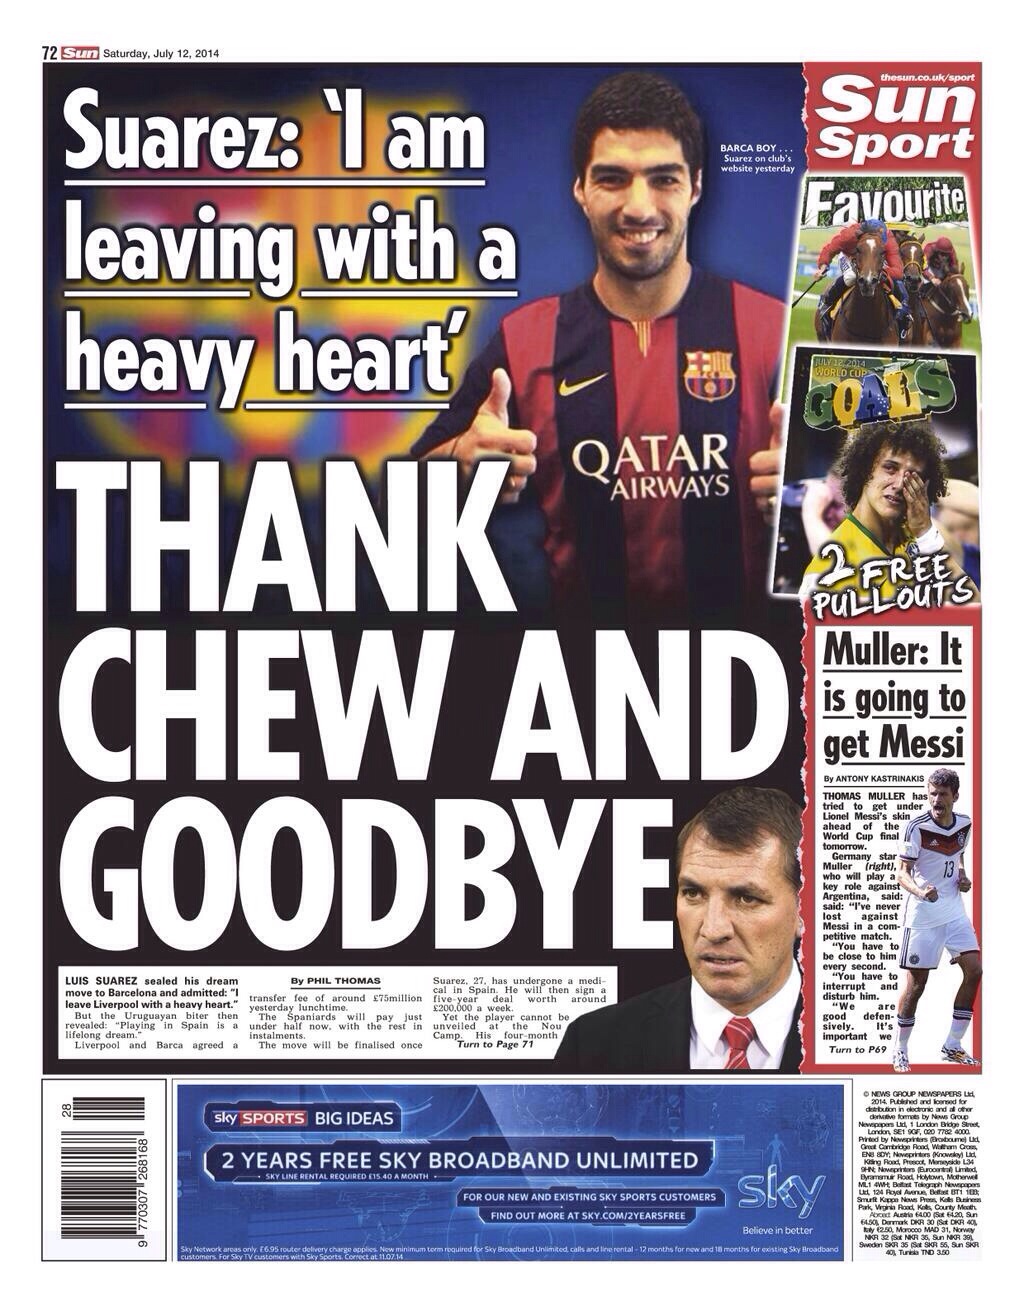 See All Of Tomorrow's UK Newspaper Back Page Headlines - talkingbaws